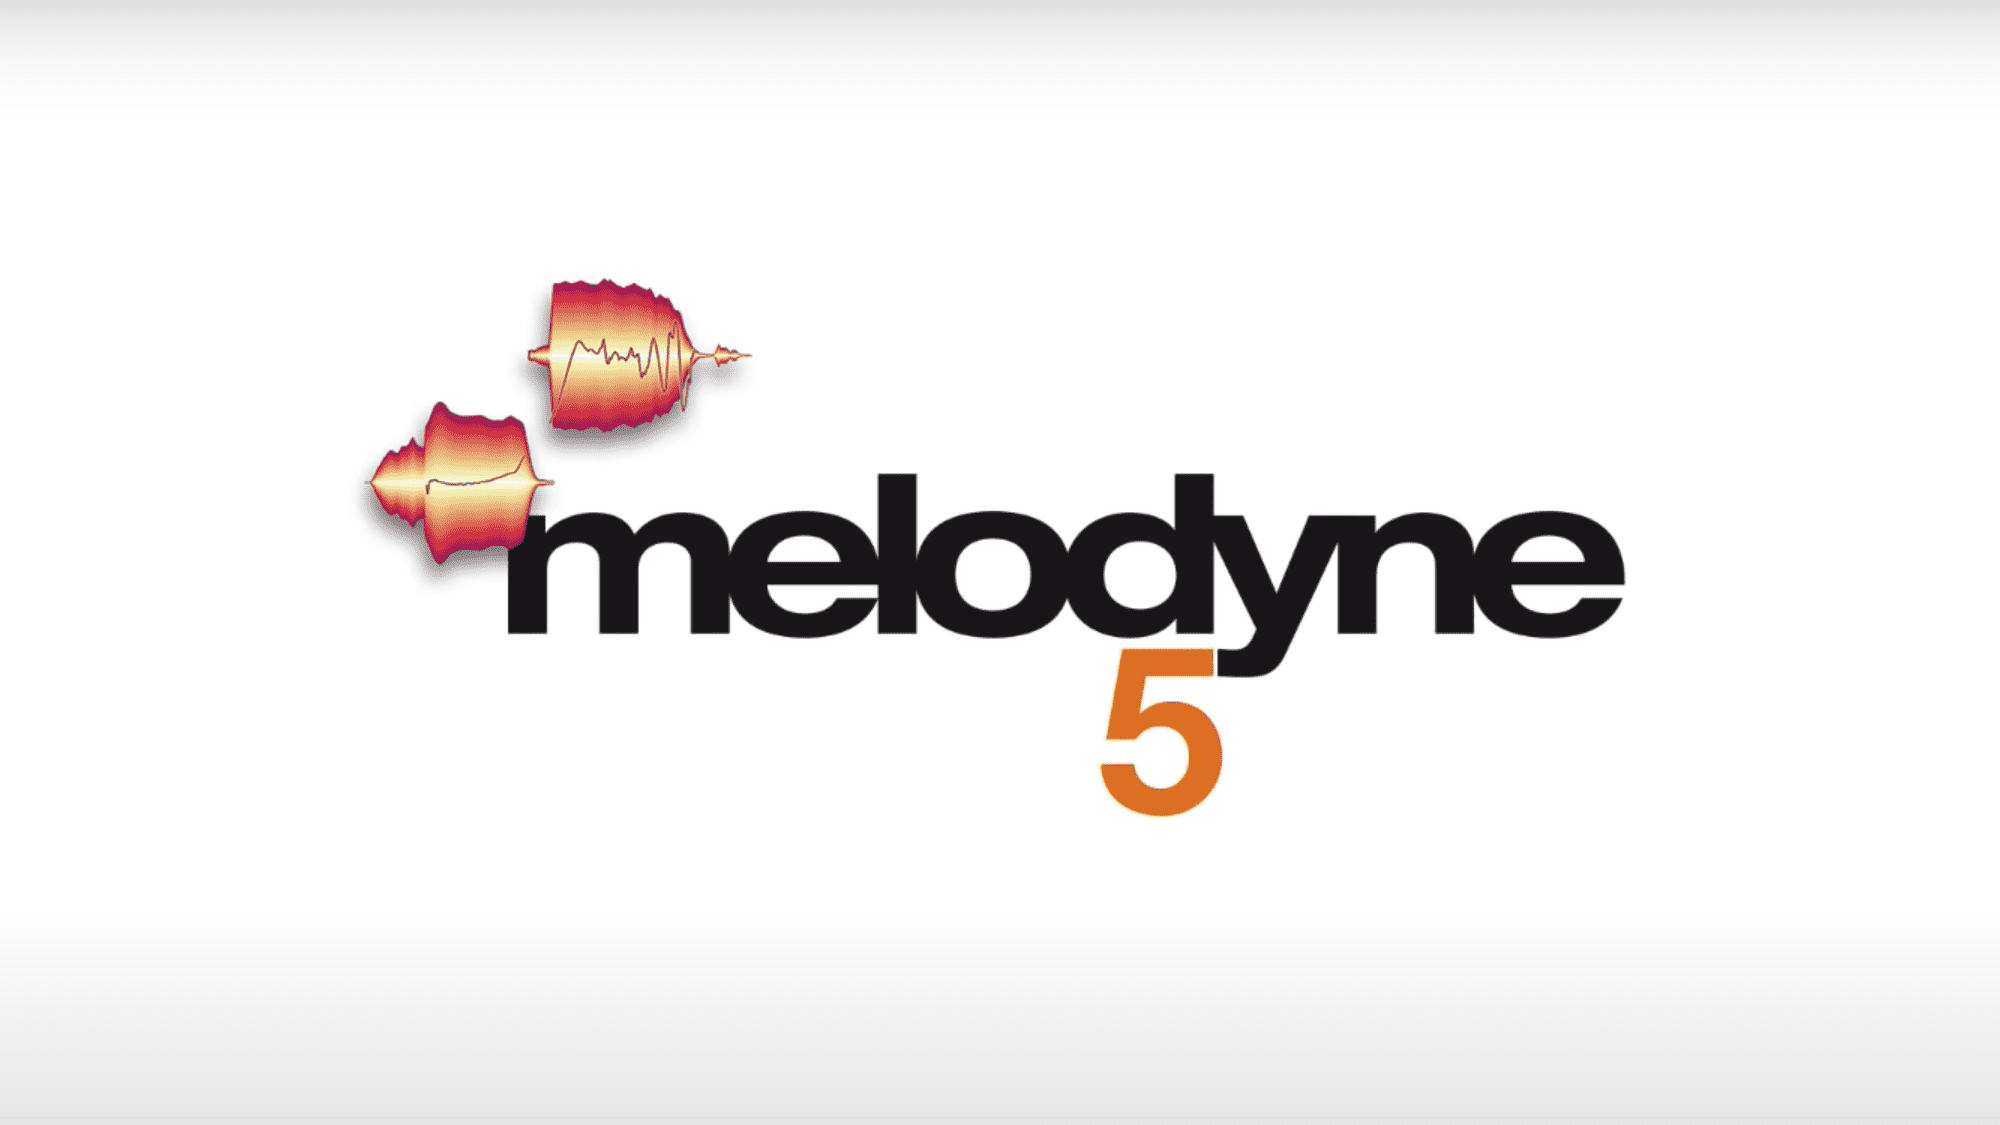 melodyne for free